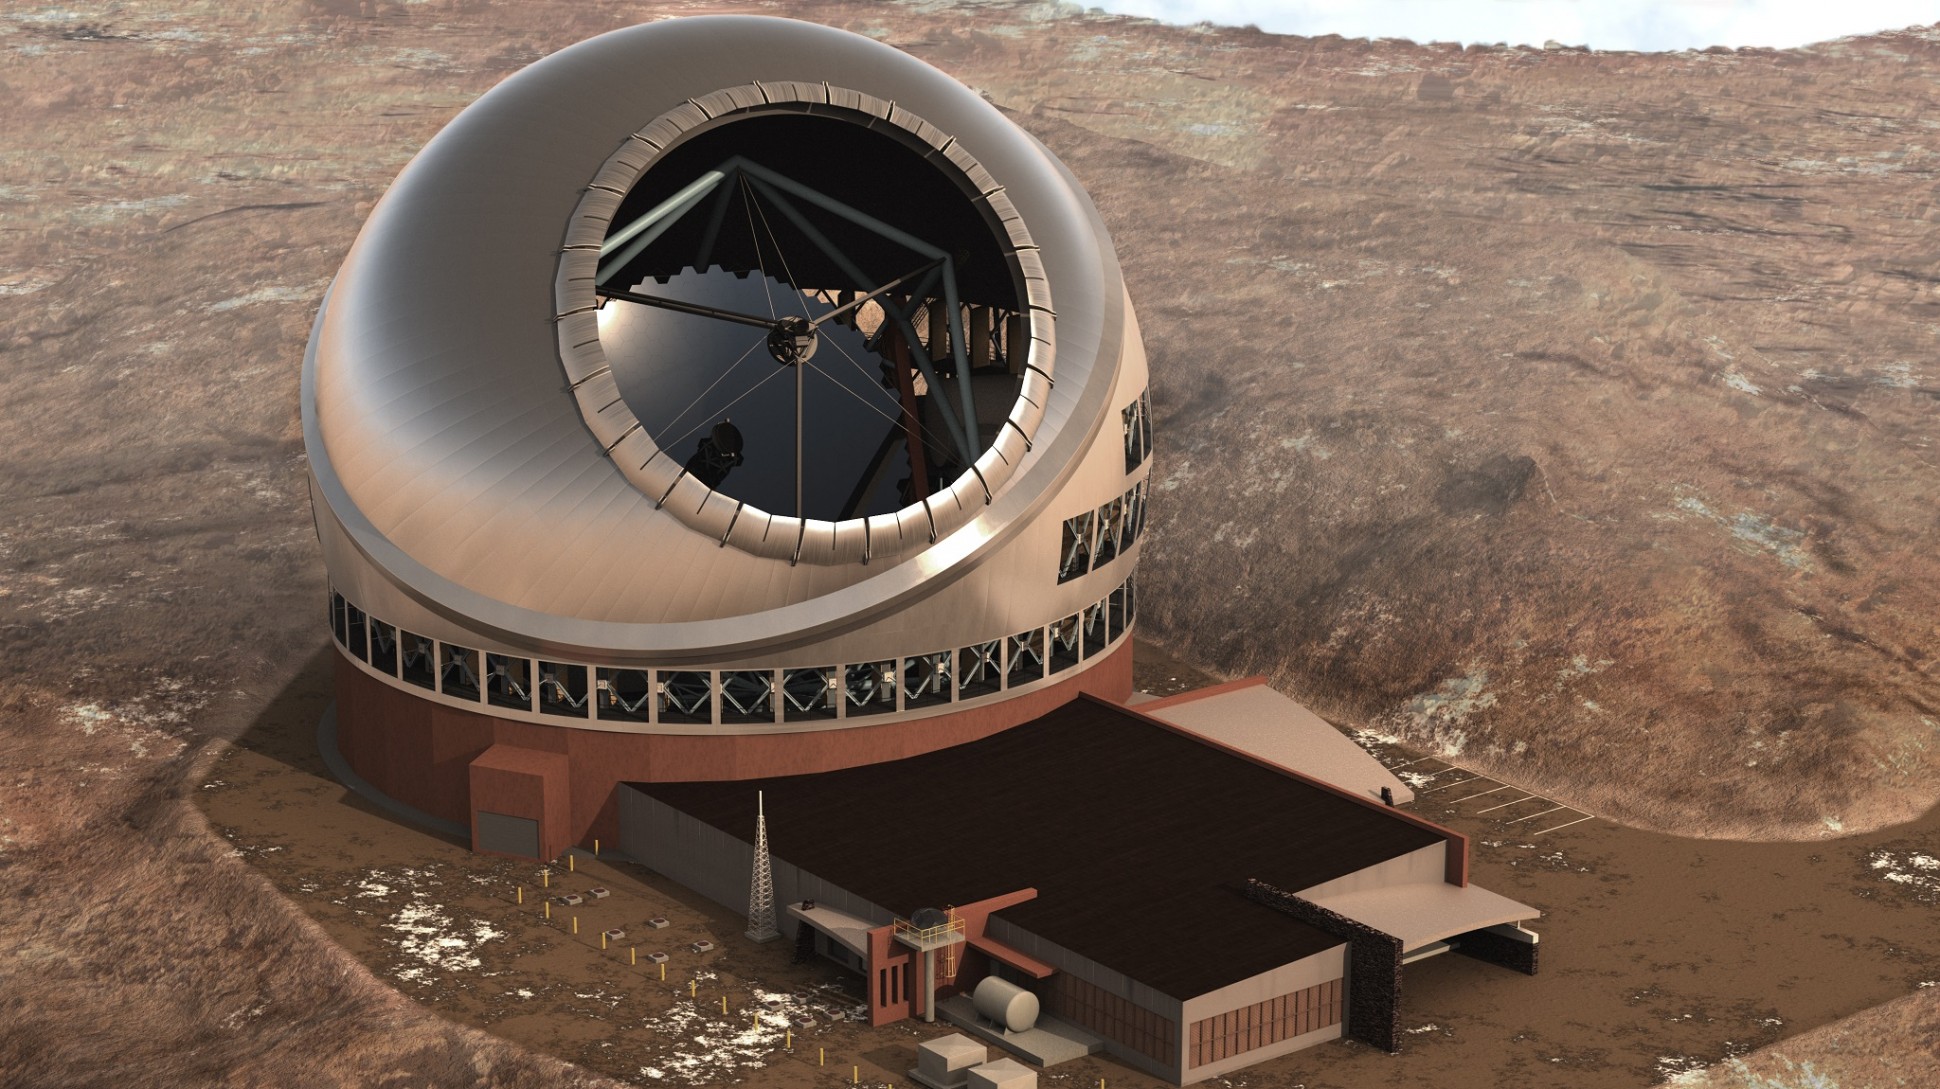 Hawaii Supreme Court Retracts Construction Permit for the Thirty-Meter Telescope